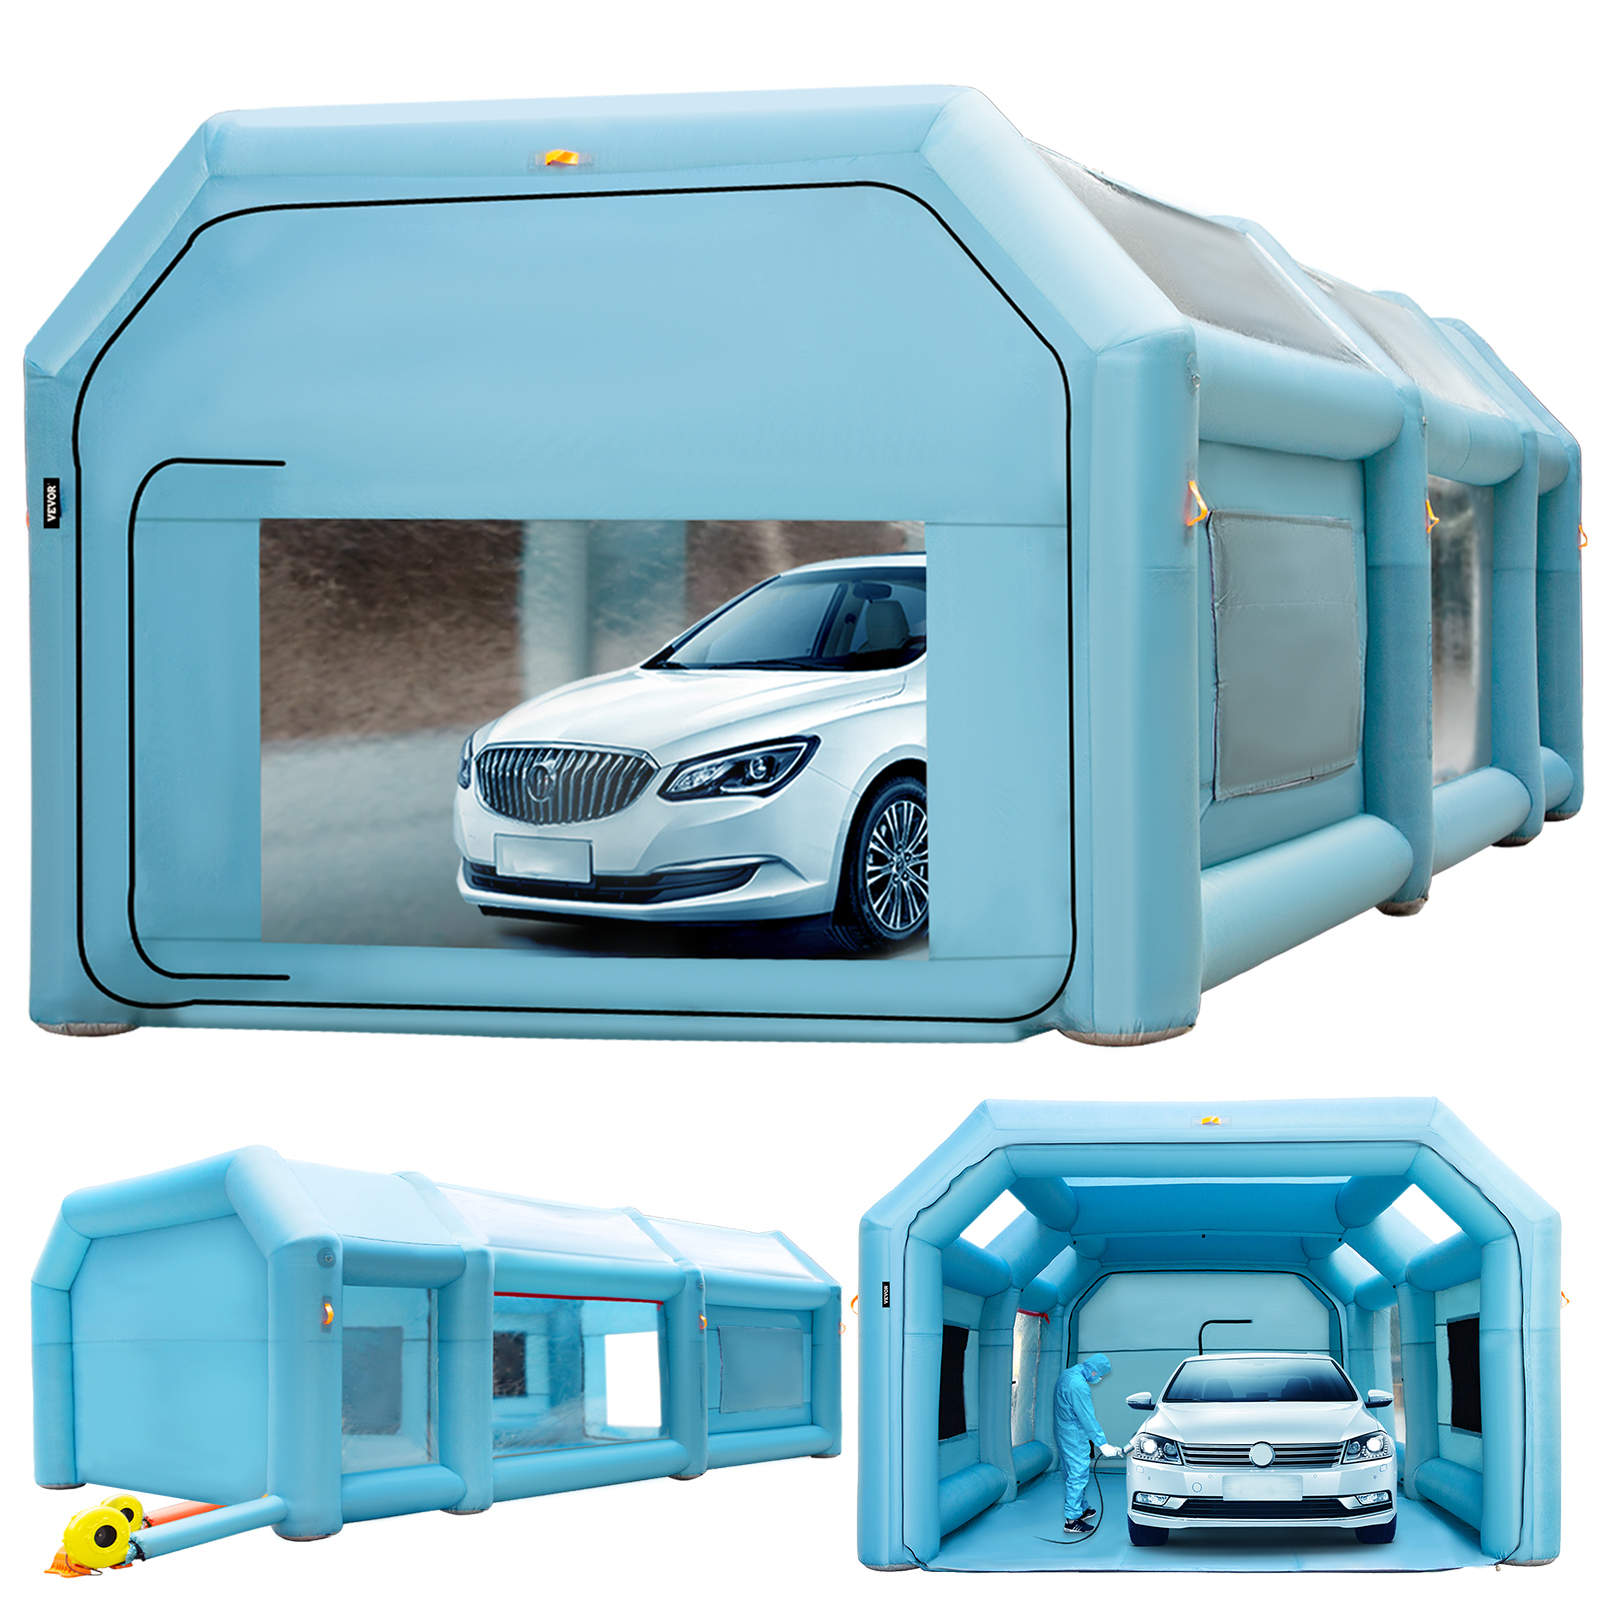 Edrosie Inc Portable Inflatable Paint Booth Large Spray Booth Car